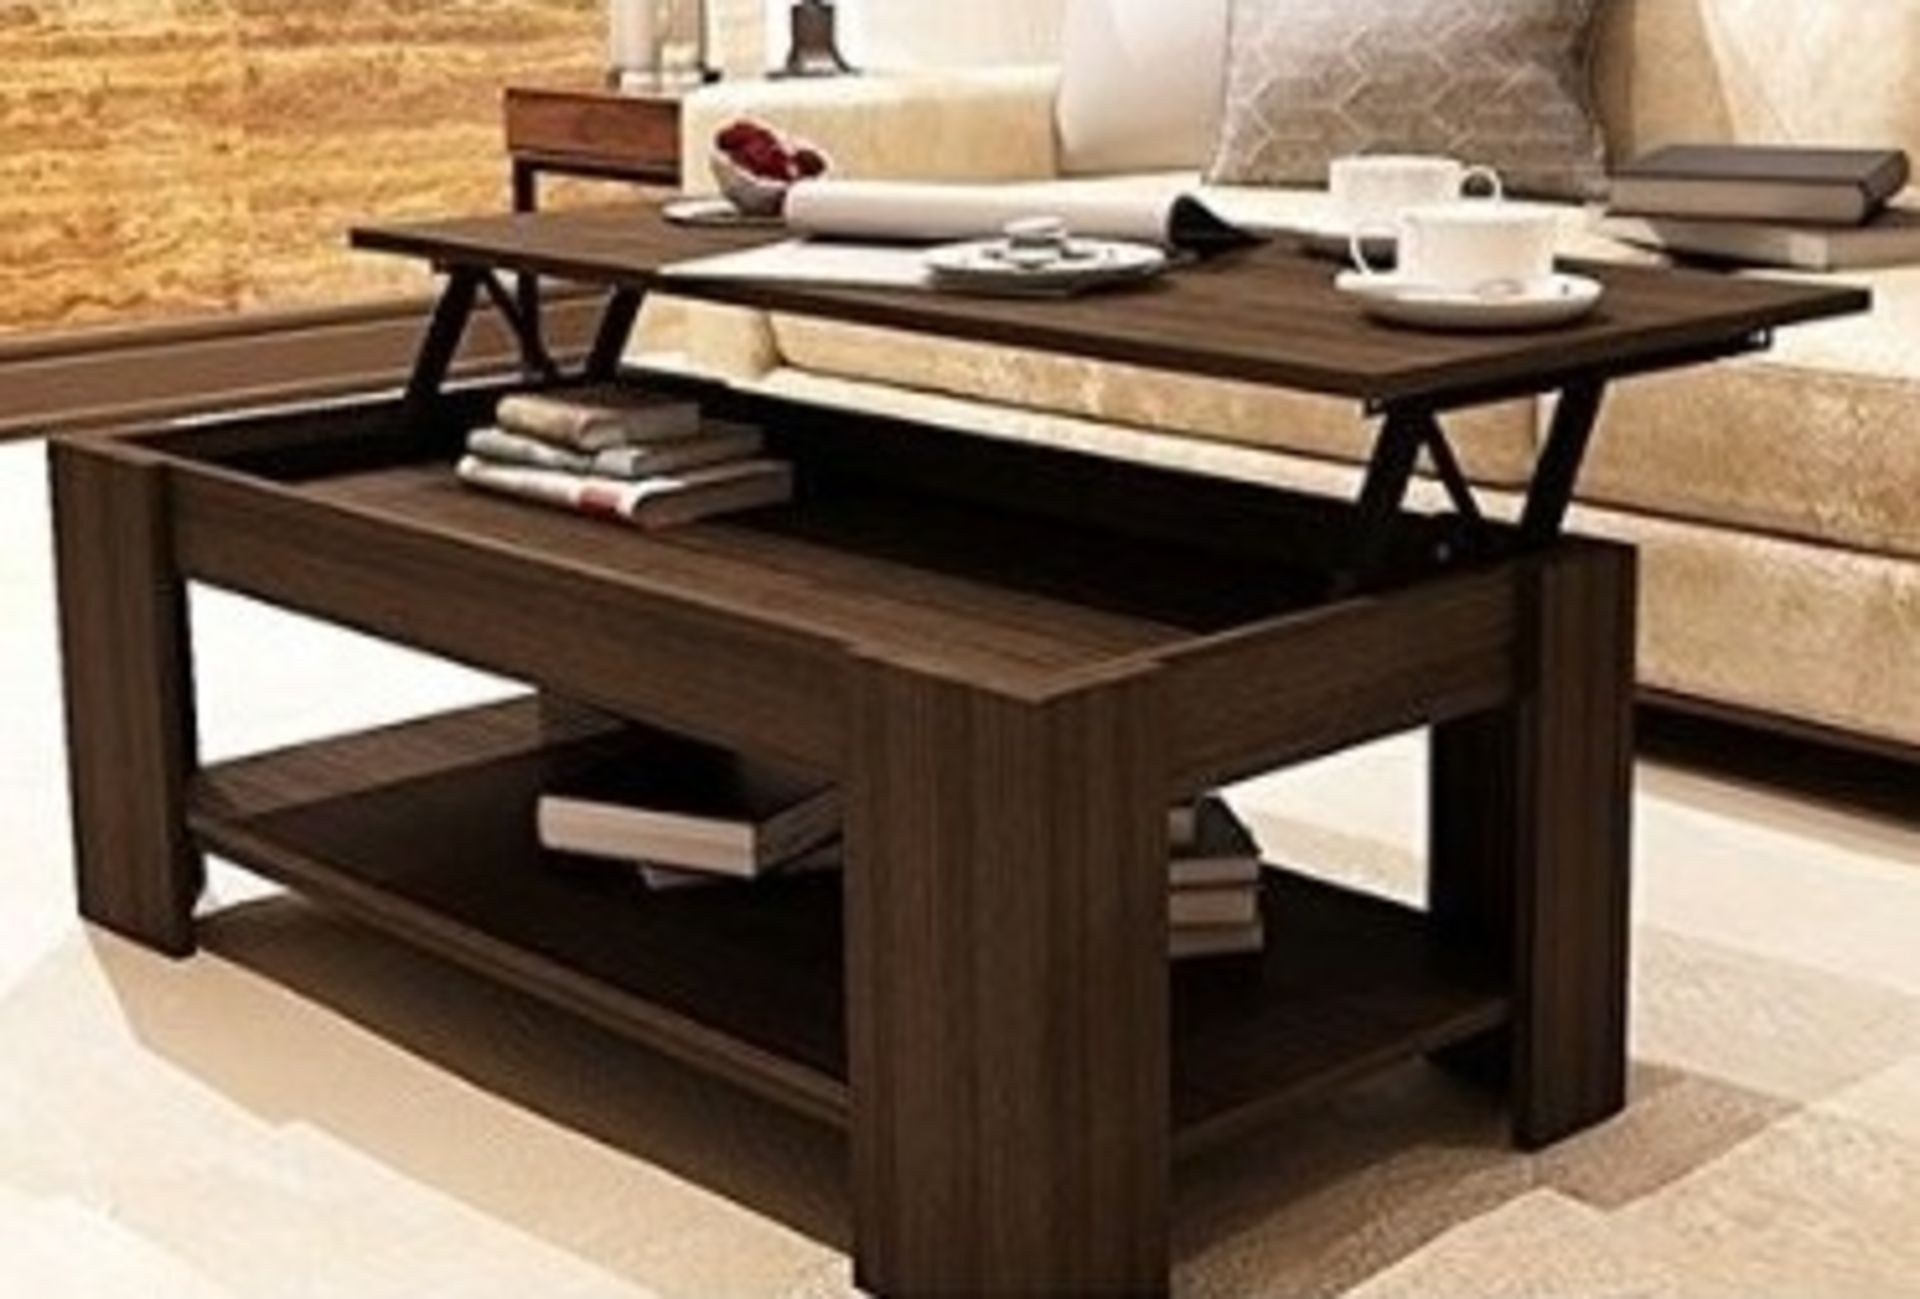 1 x "Caspian" Lift Up Top Coffee Table with Storage - Colour: ESPRESS0 - Sleek Modern Design - - Image 2 of 2